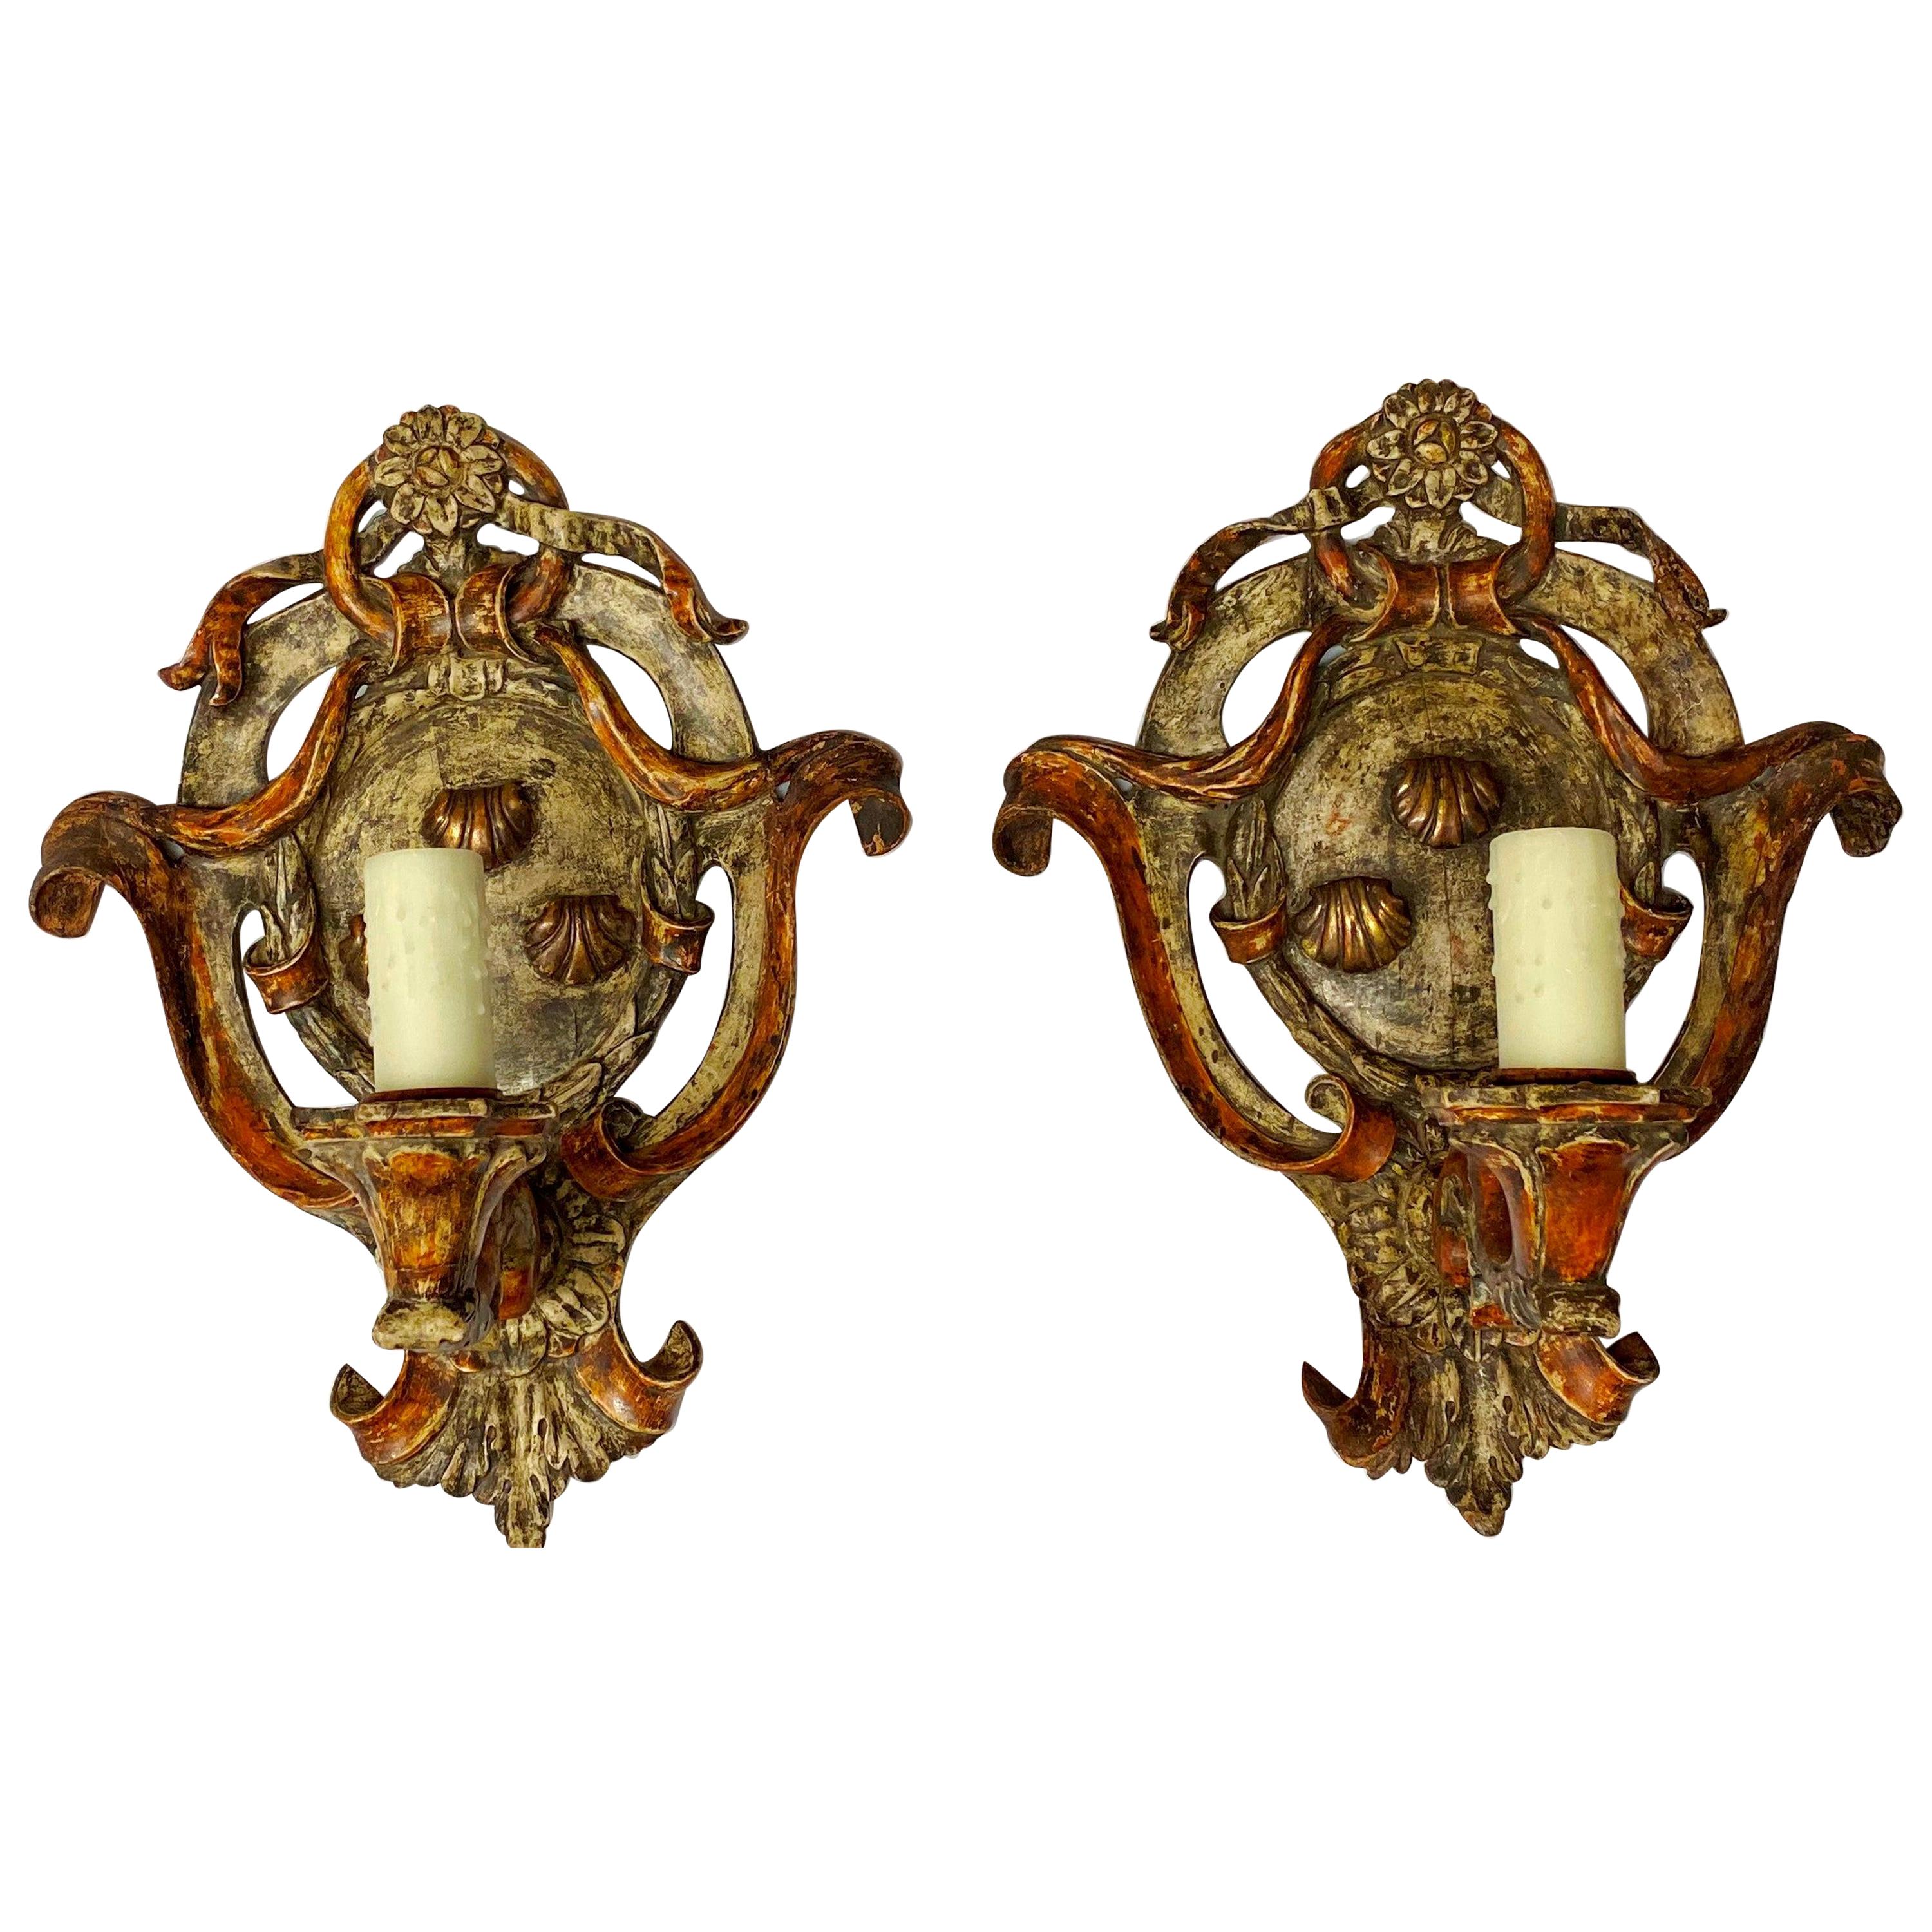 Pair of Italian Painted Carved Wood Sconces, 19th Century